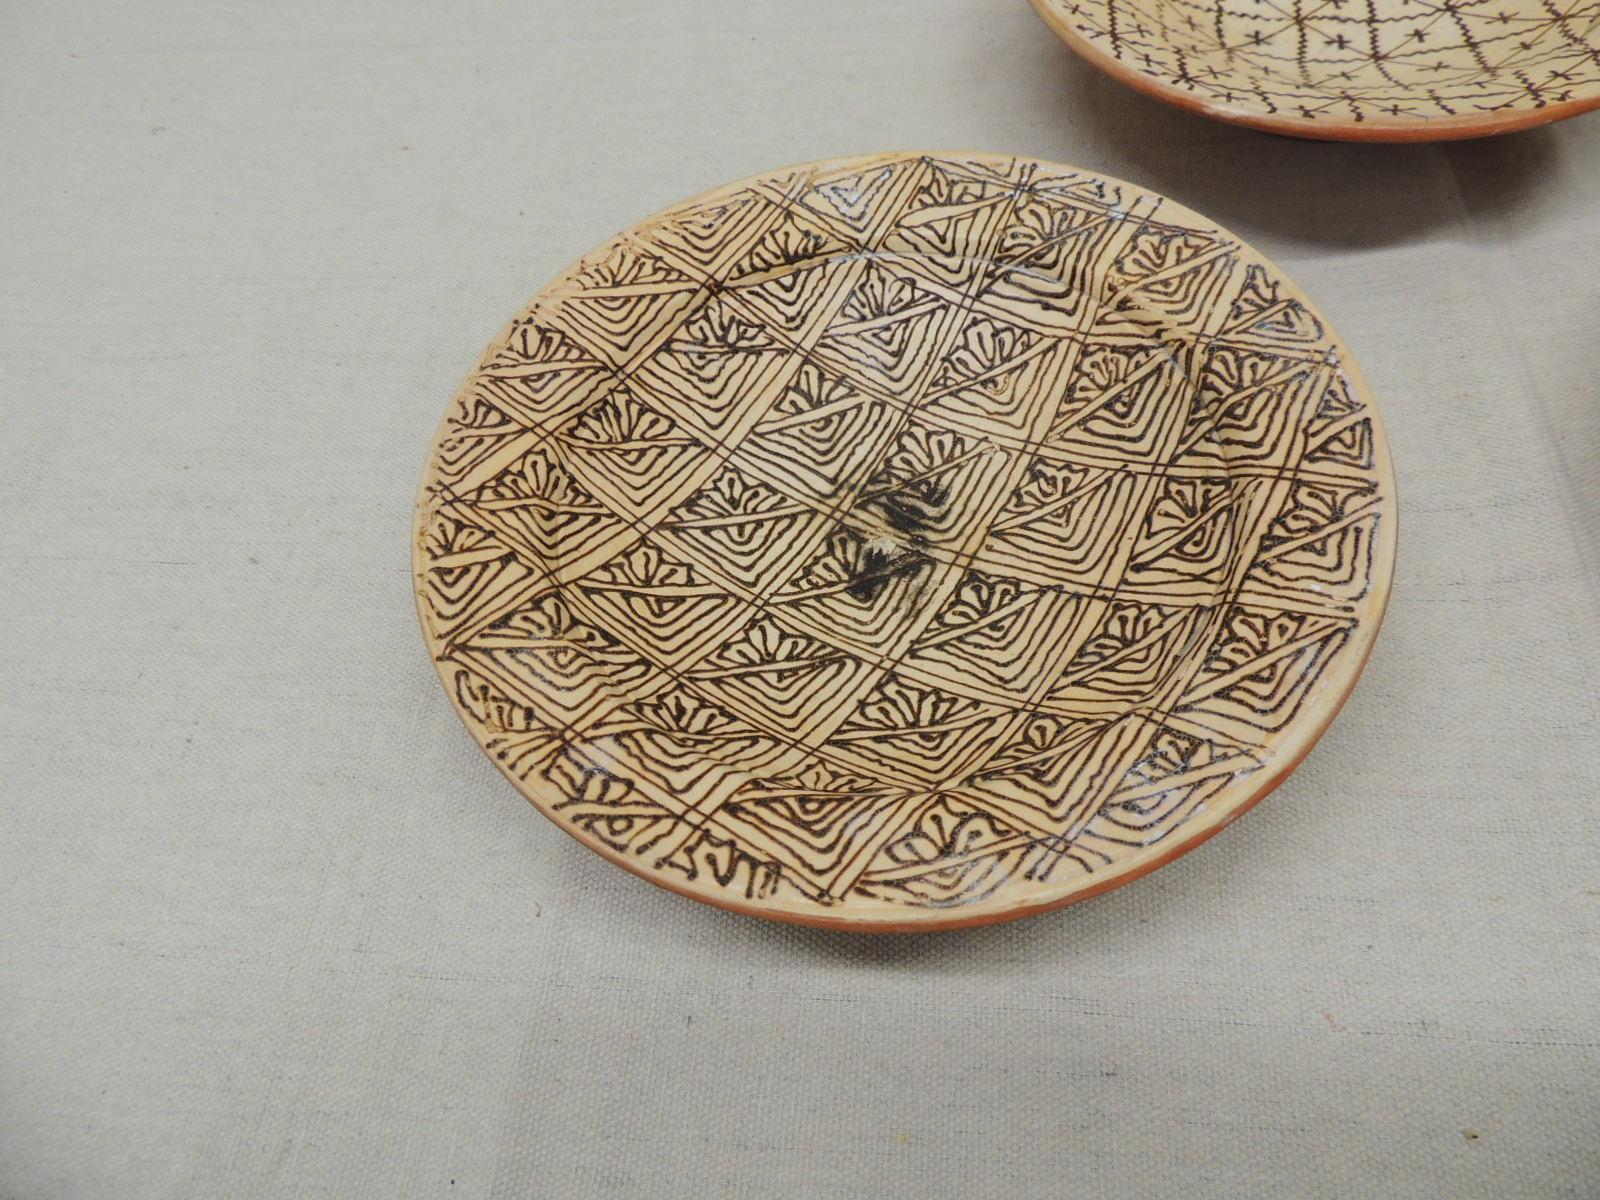 Set of (3) Graphic Moroccan gallery wall plates.
Hanging hole in the back.
Size: 8.5